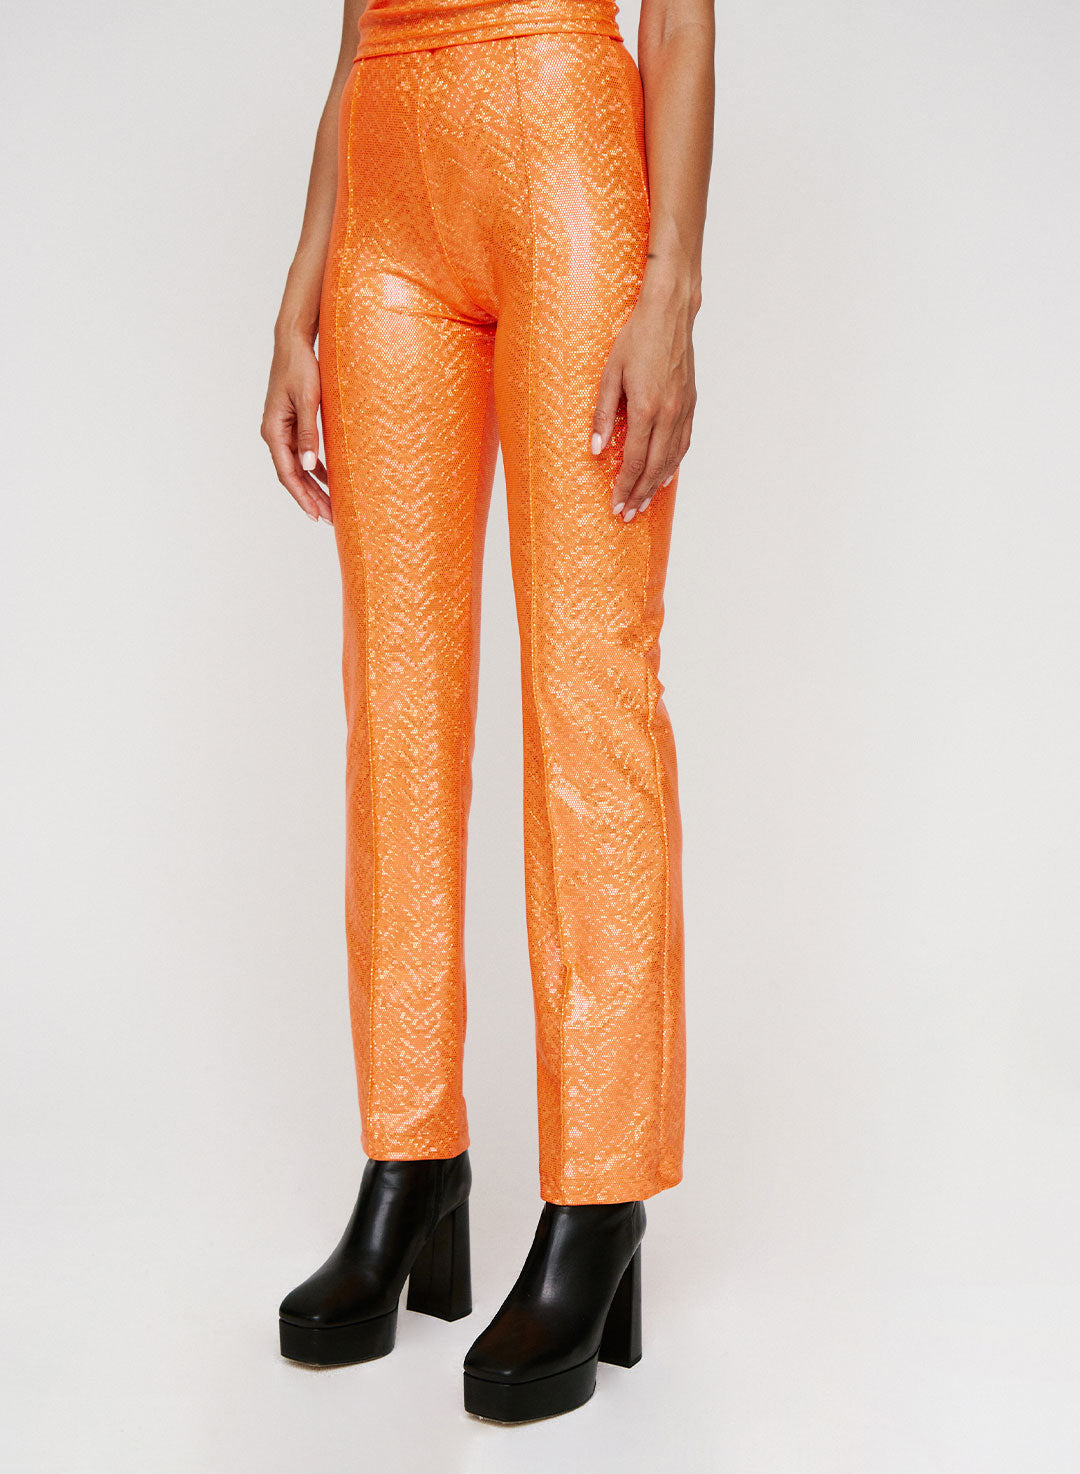 Peachy Disco Trousers - MADE TO ORDER